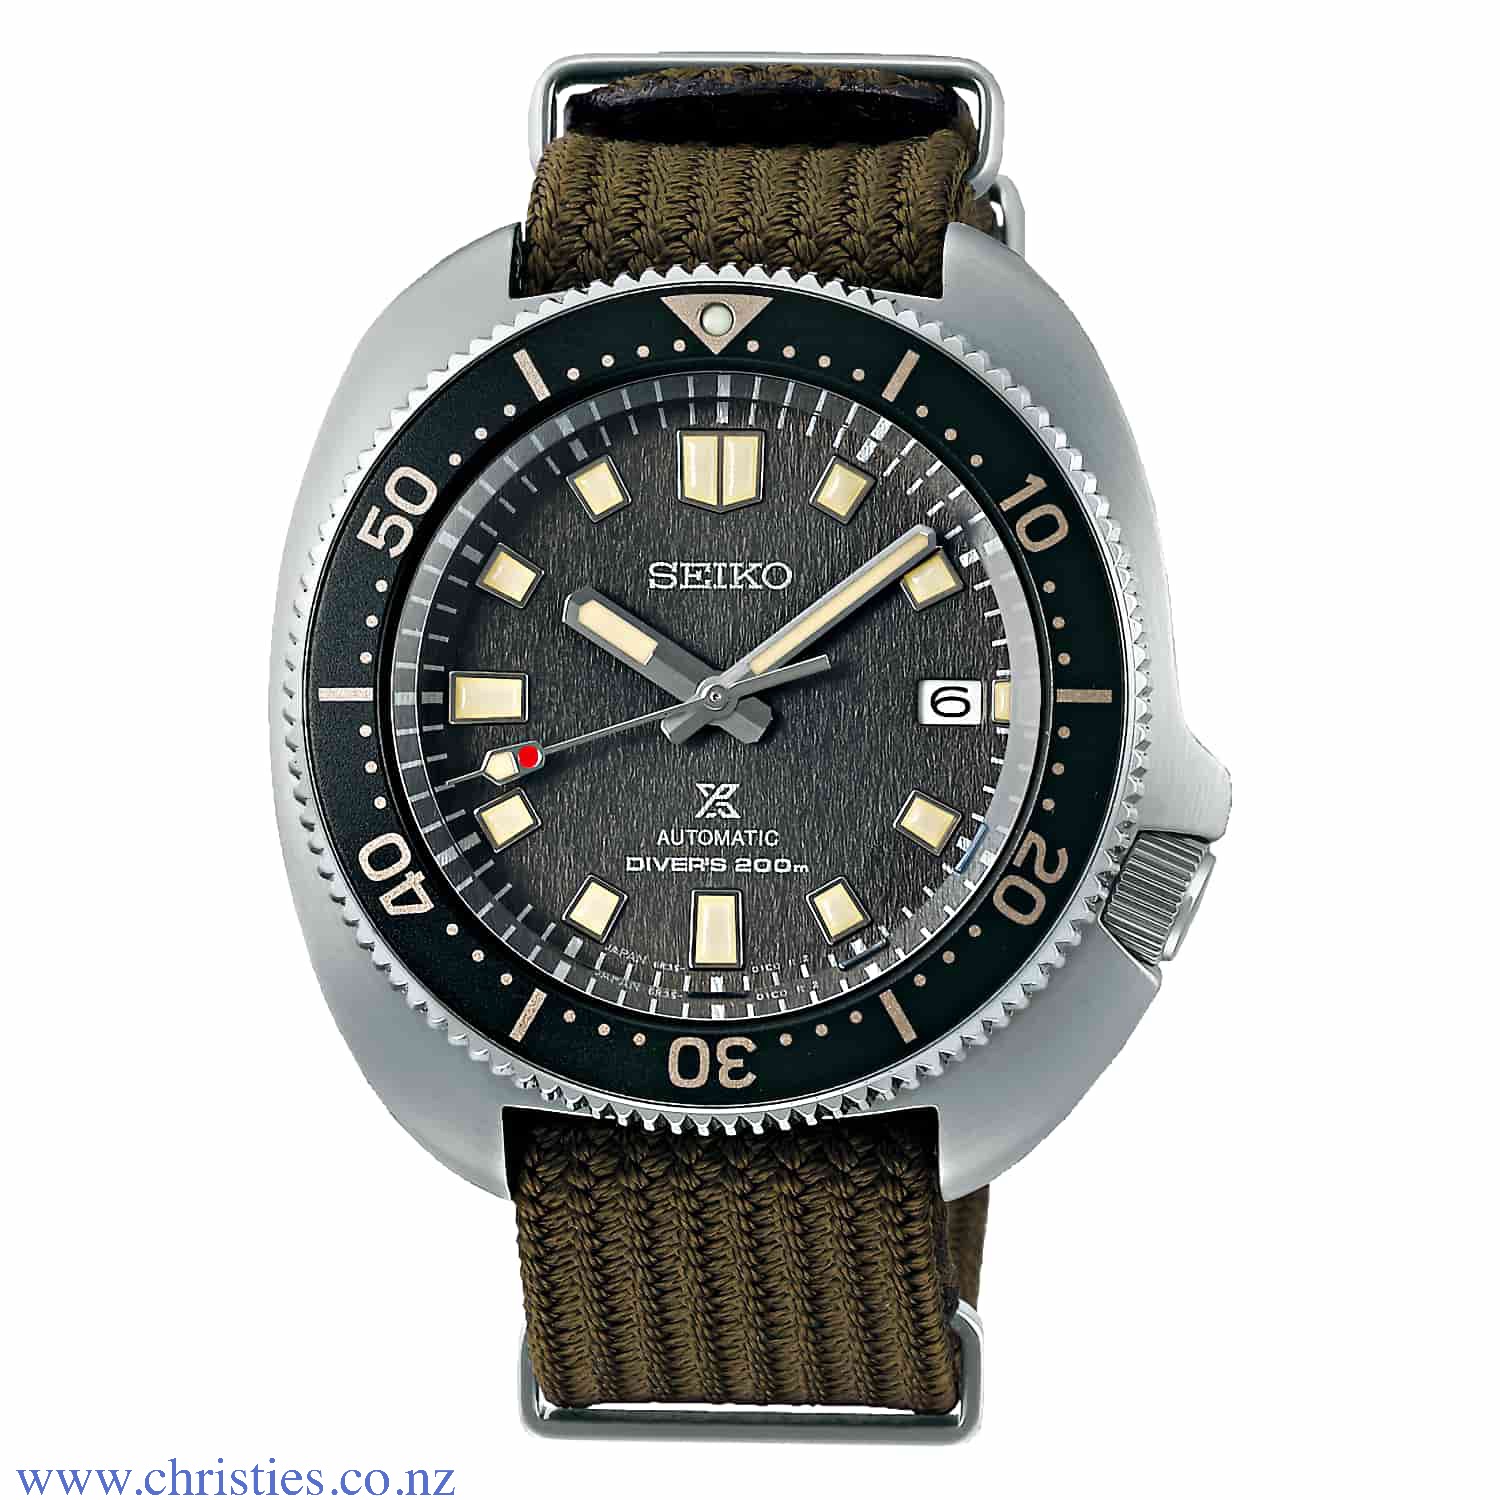 SPB237J1 Seiko Willard Prospex Willard 62MAS with ISO NATO Straps Watch. Ever since Seiko’s first diver’s watch was introduced in 1965, the company has continuously pushed back the boundaries of what diver’s watches can offer. Today, Seiko introduces in t